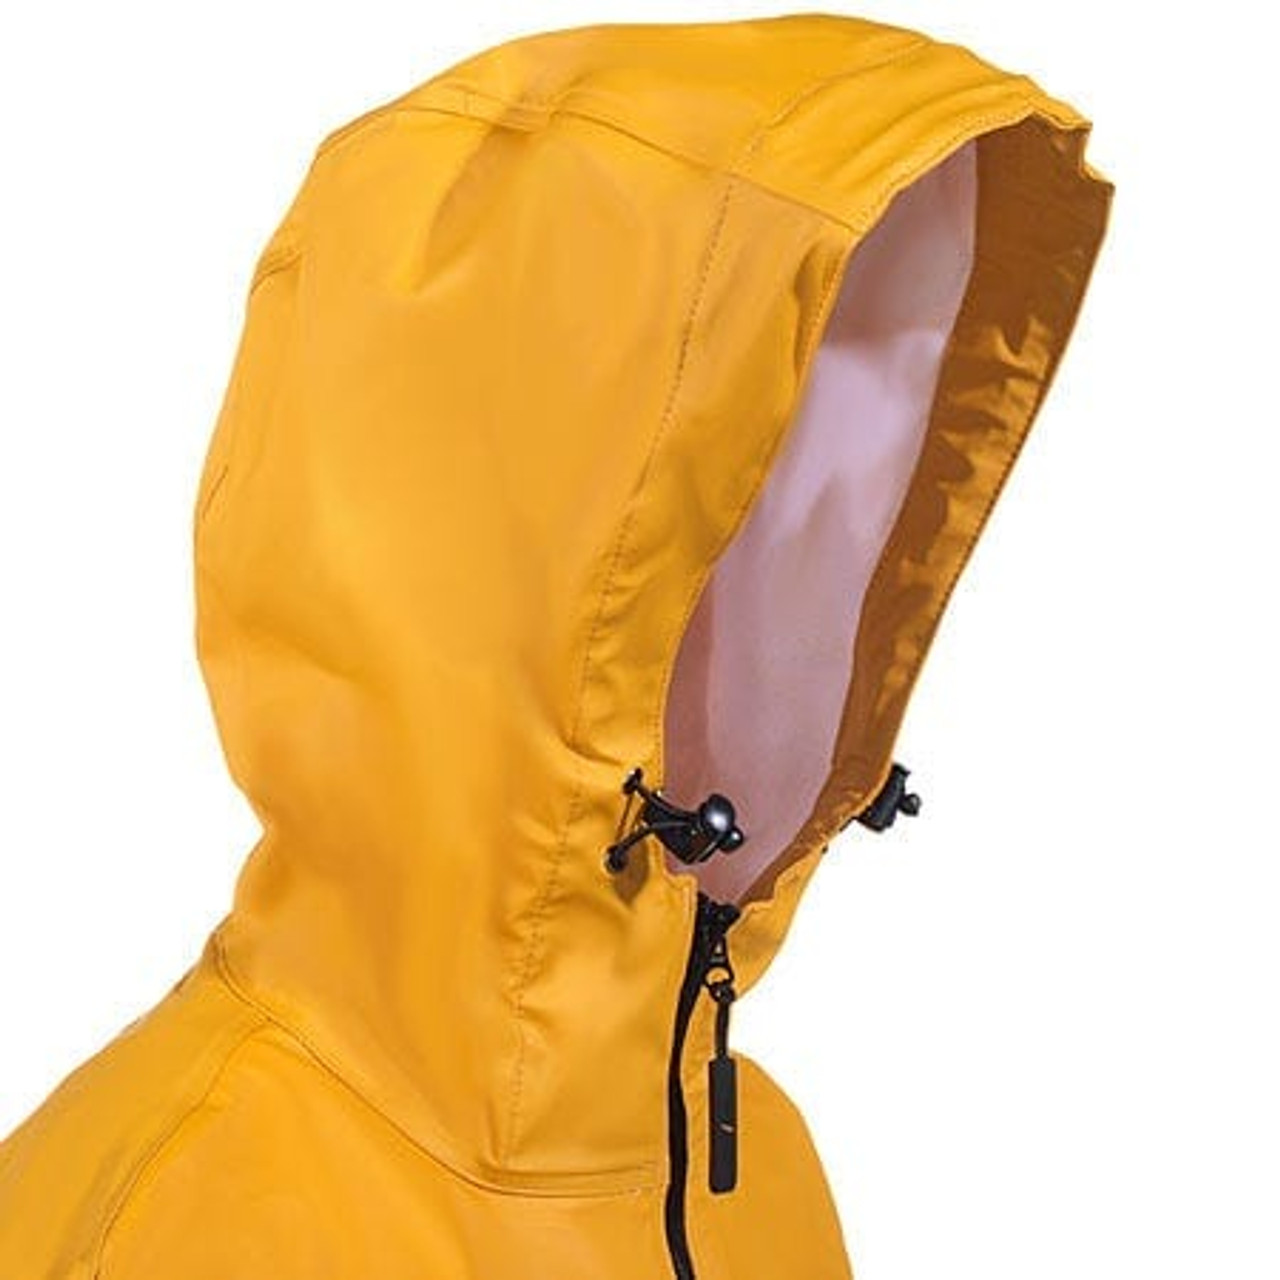  Helly-Hansen Workwear Roan Waterproof Anorak Jackets for Men  Made of Heavy-Duty High-Mobility Protective PVC-coated Polyester,  Ochre/Black - Small: Outerwear: Clothing, Shoes & Jewelry